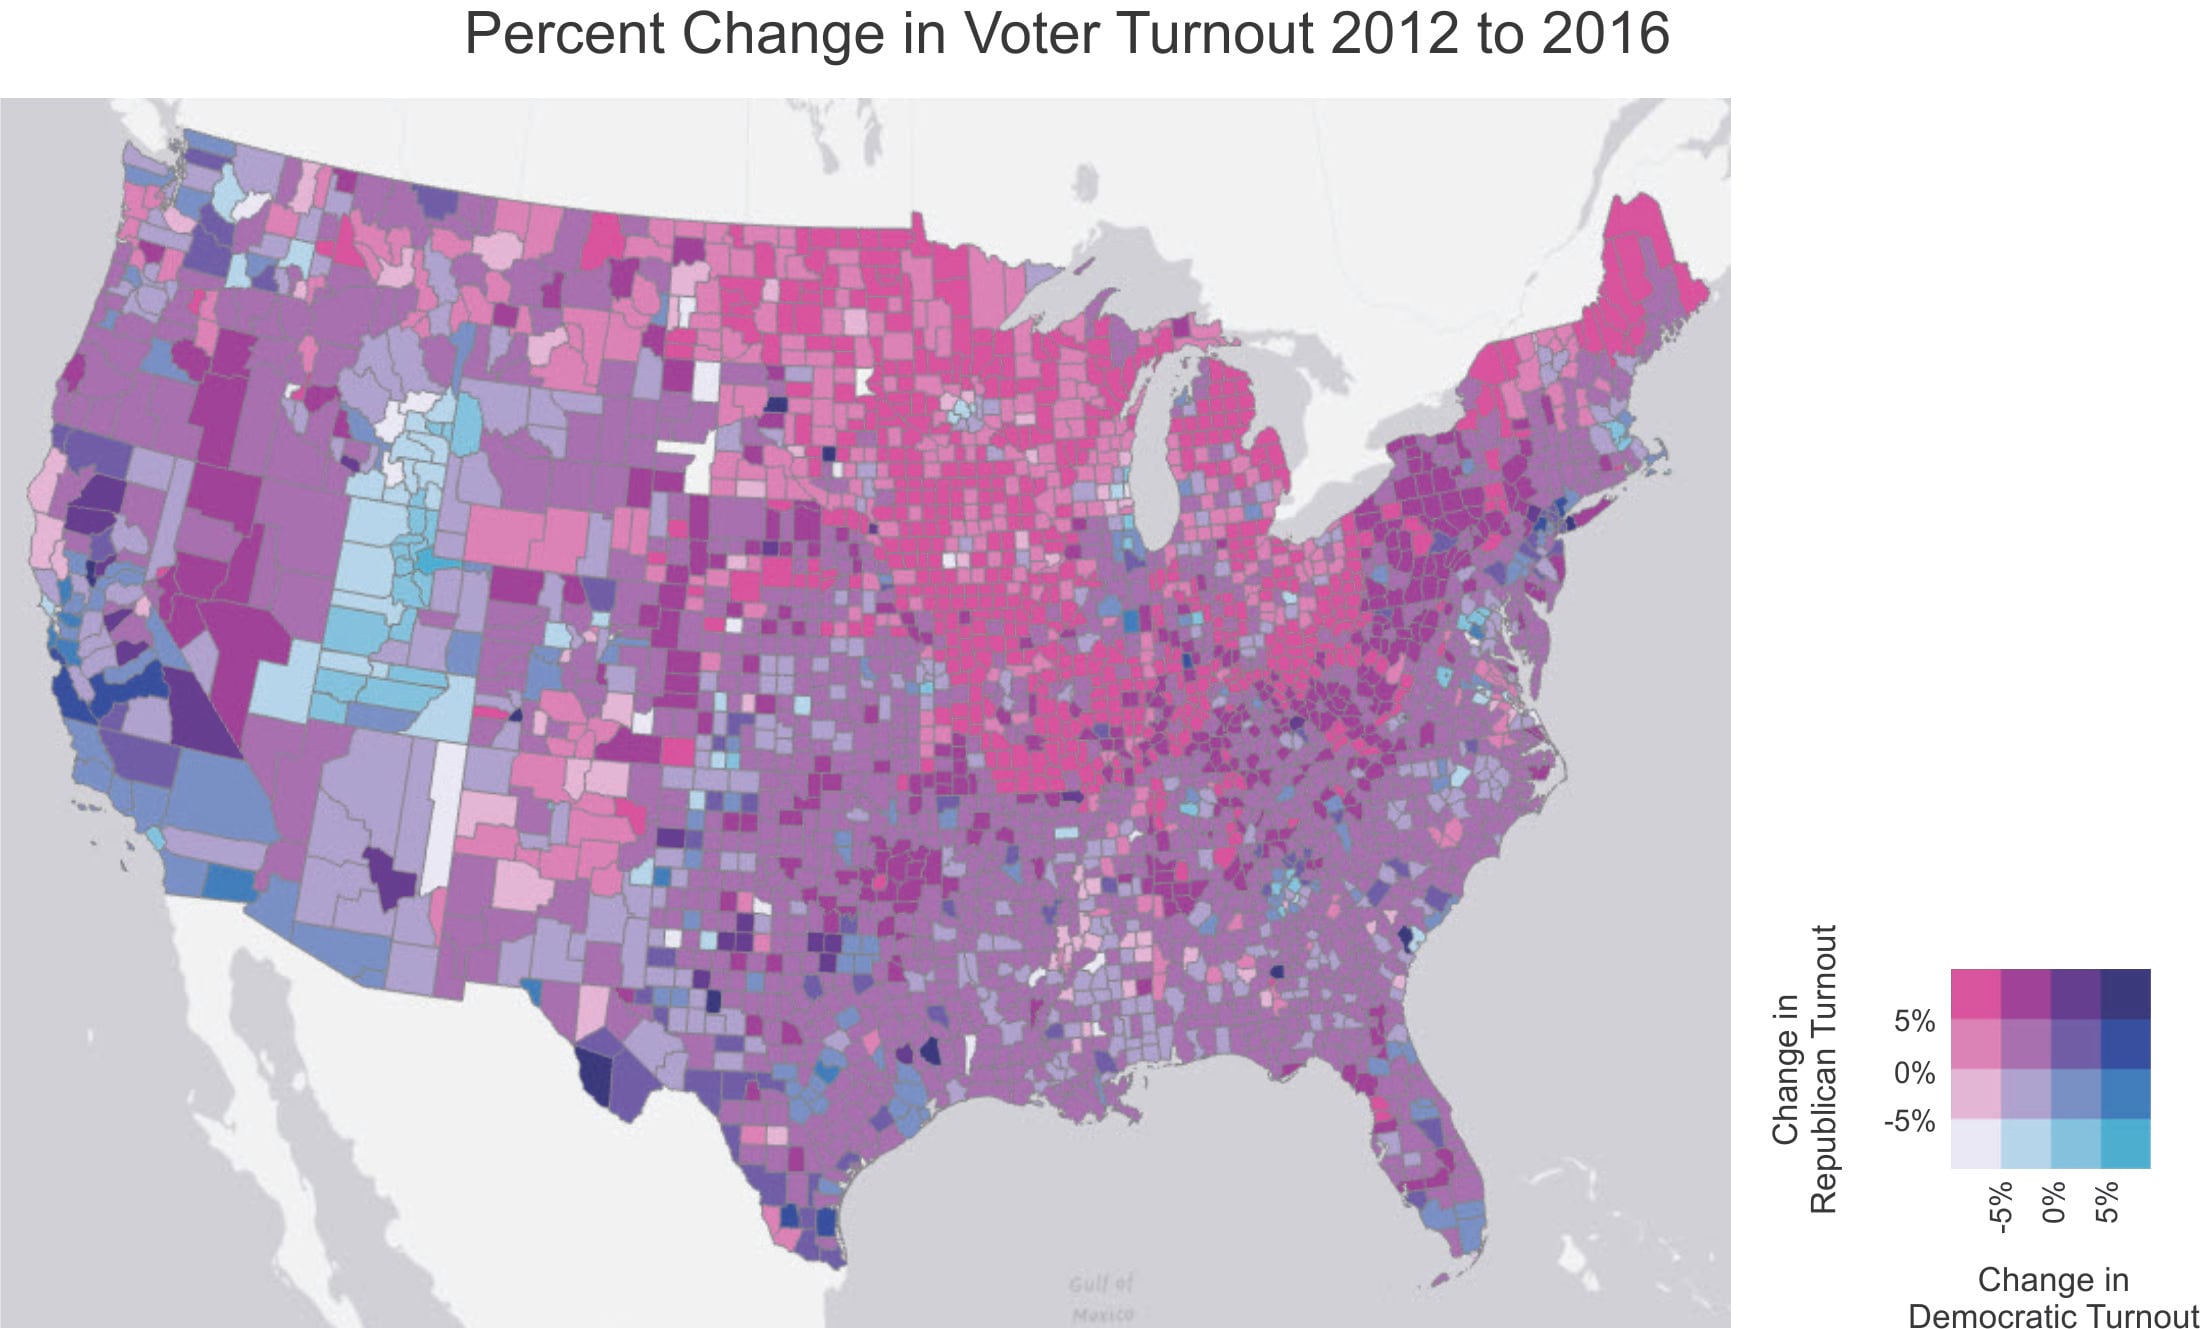 Map of continental US with counties color-coded by percent change in voter turnout, for both the Republican and Democratic parties